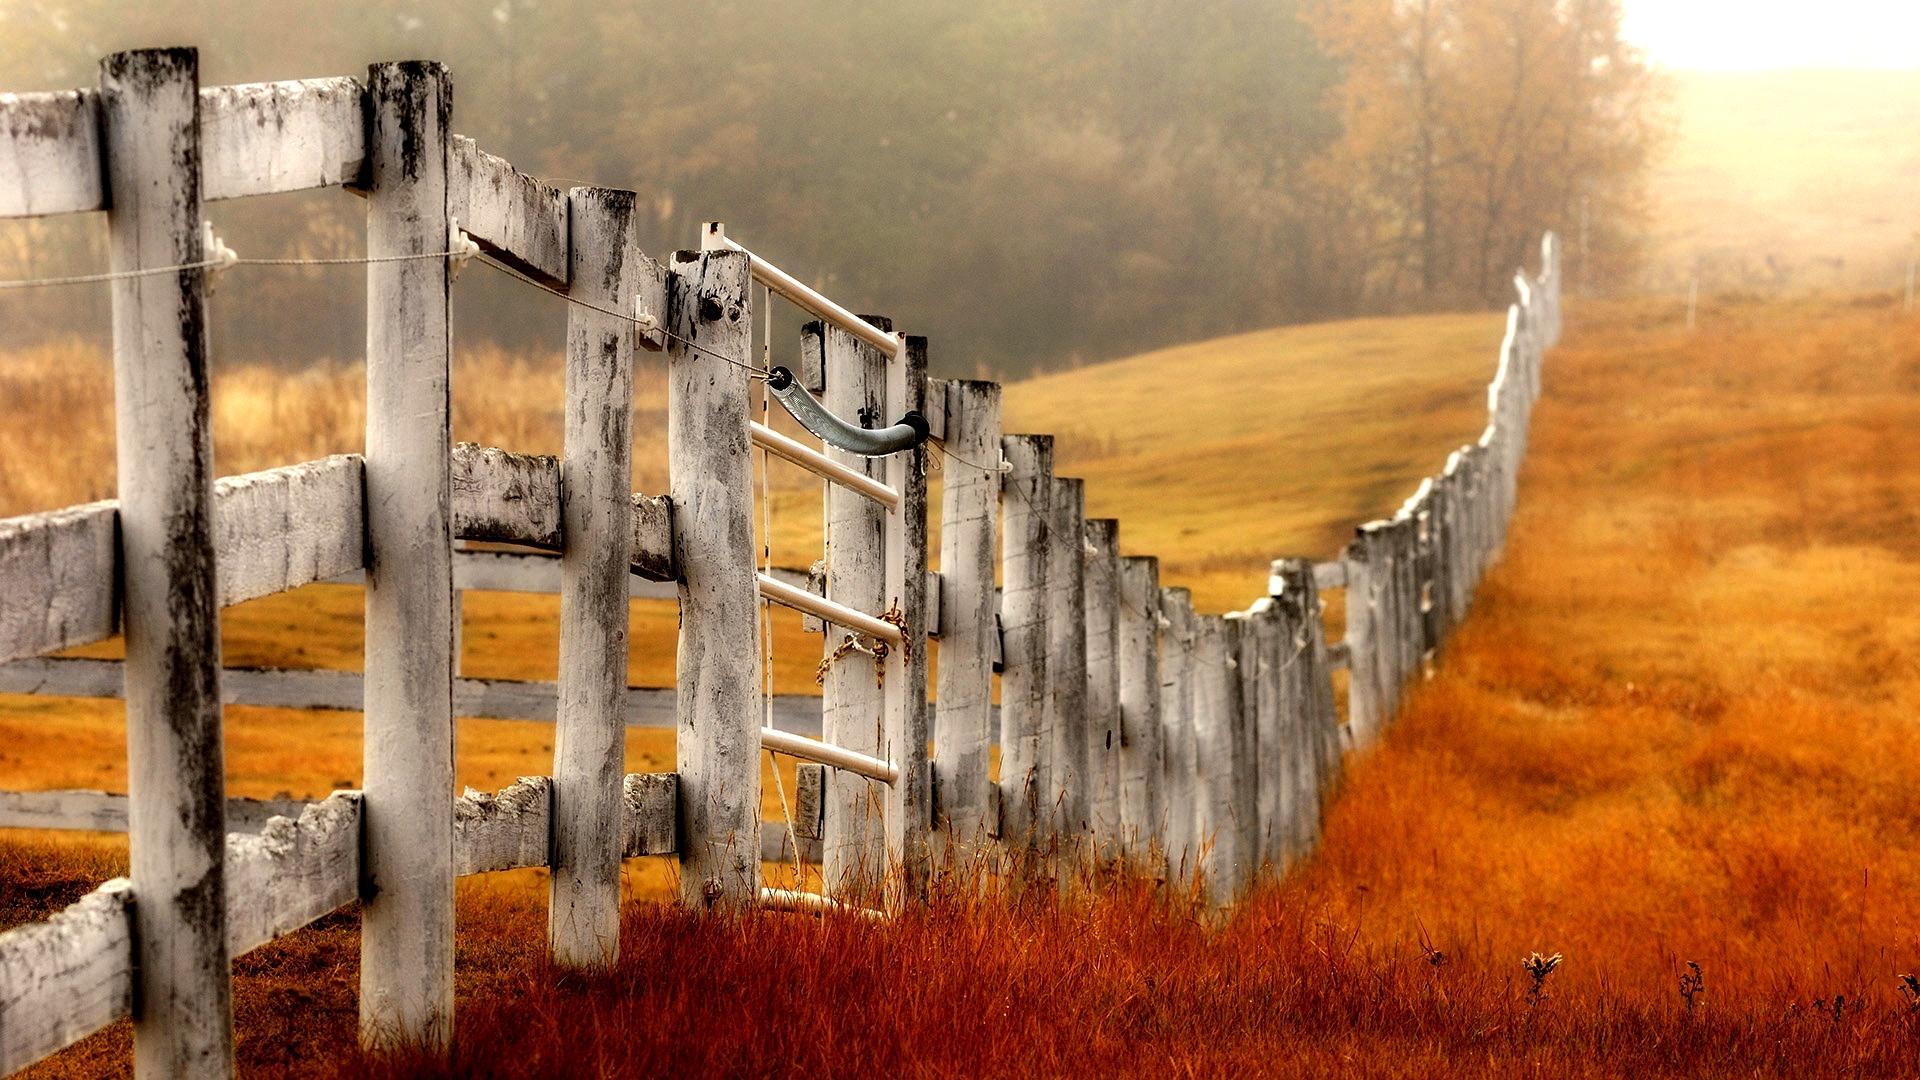 58 Country Desktop Wallpapers On Wallpaperplay - Country Background With Fence - HD Wallpaper 